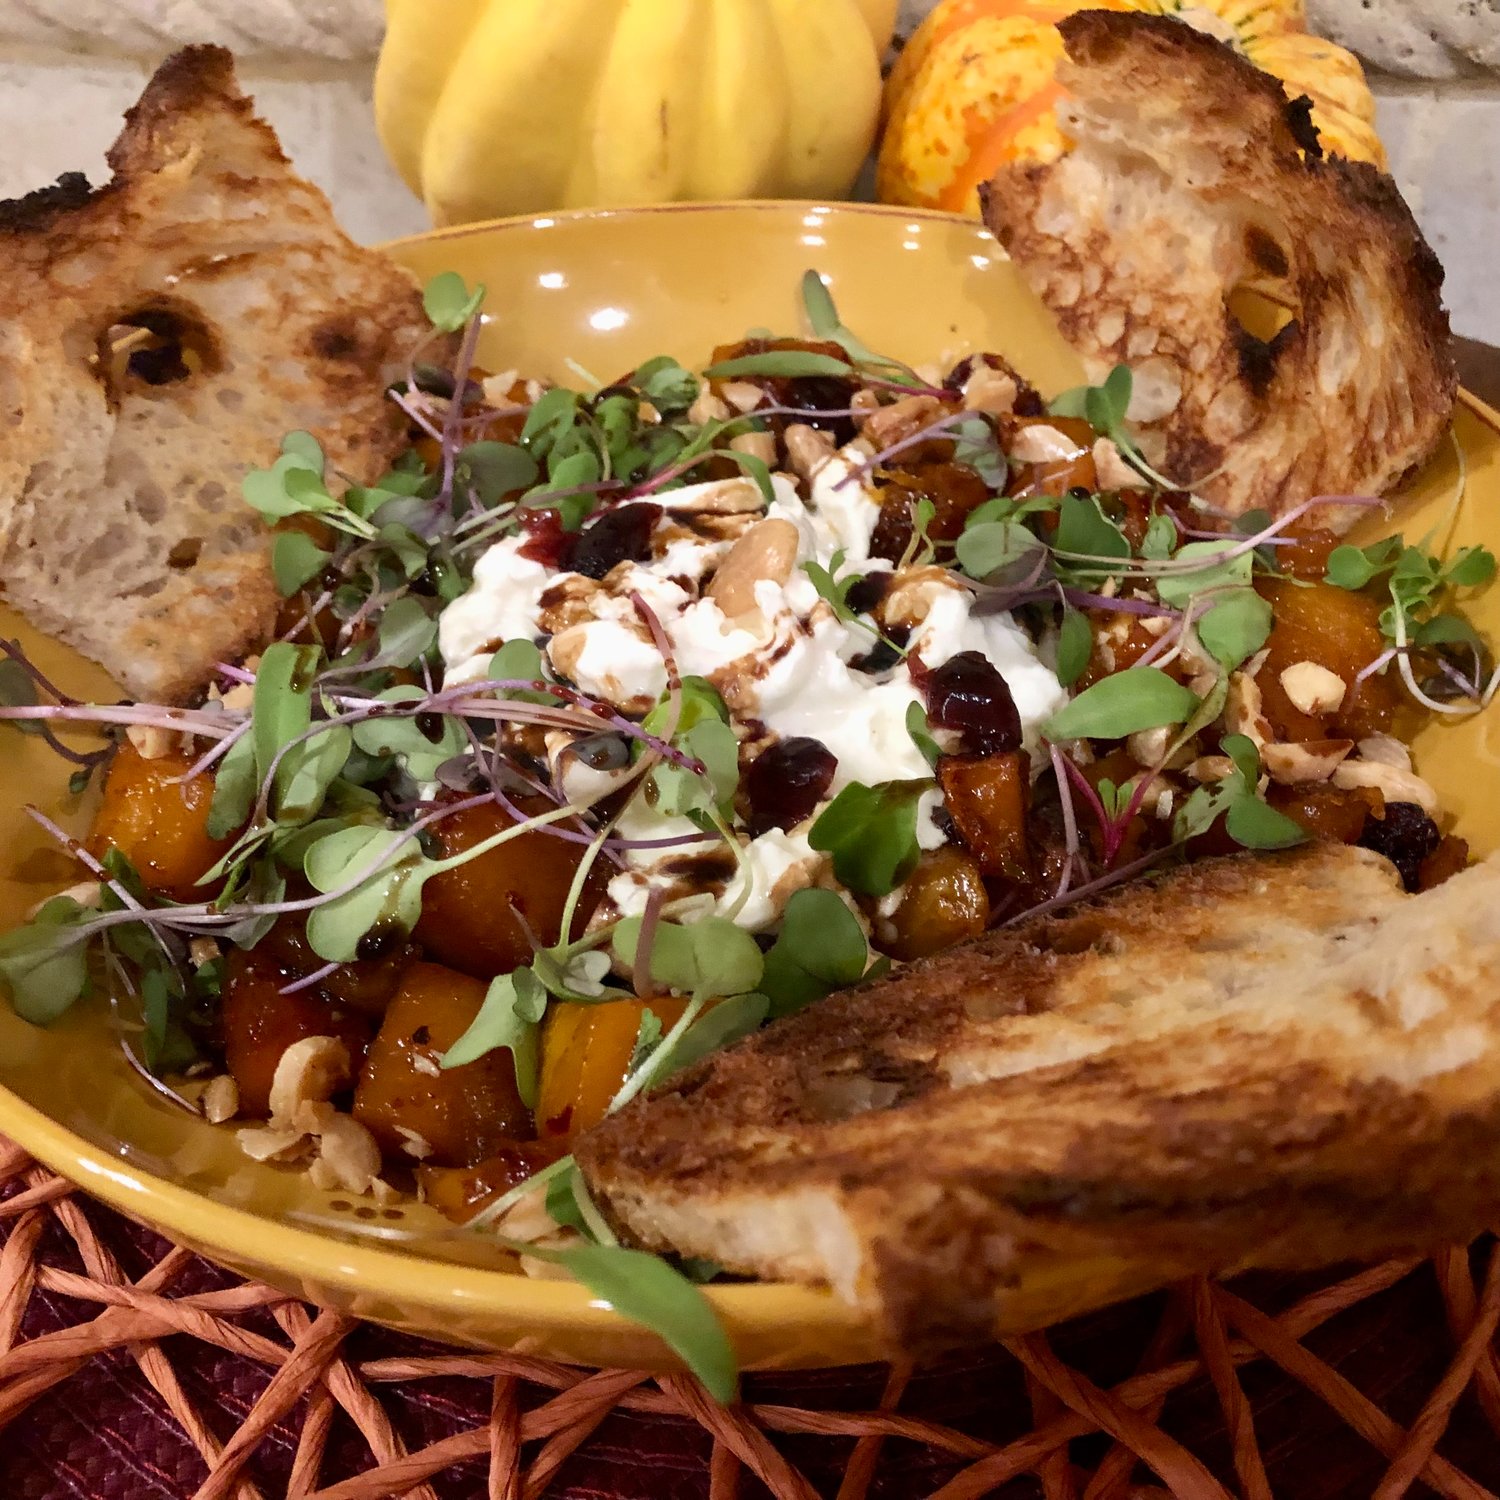 Caramelized Butternut Squash with Burrata is an upscale, meatless main dish to serve the night before tackling the turkey on Thanksgiving.